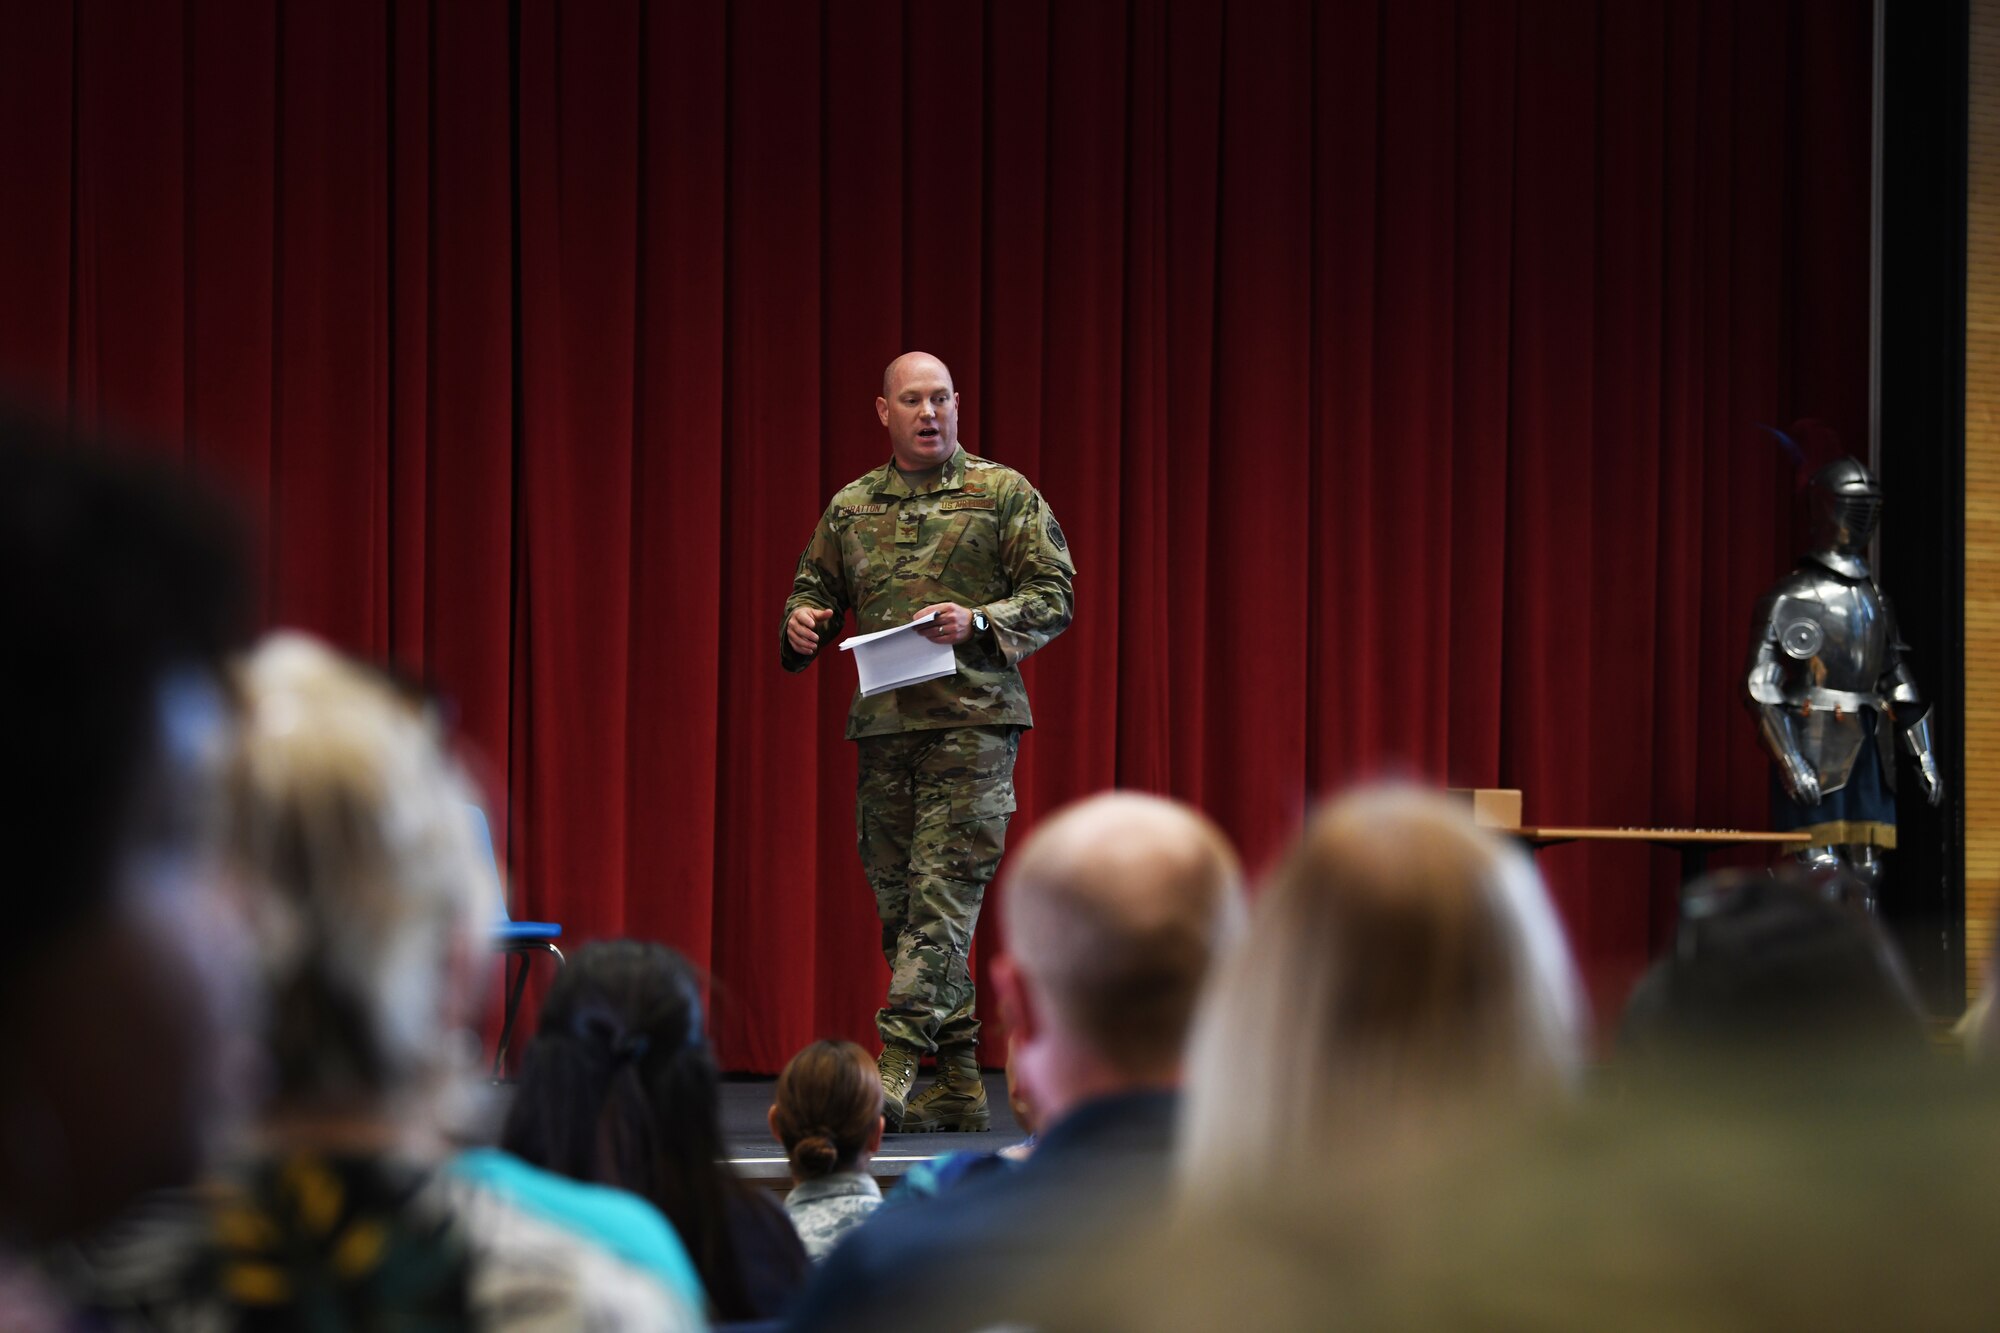 U.S. Air Force Col. John Stratton, 48th Fighter Wing vice commander, speaks to teachers of Liberty Wing schools at Royal Air Force Lakenheath, England, Aug. 29, 2019. Stratton shared information about the Liberty Wing’s mission, future plans of expansion and partnership with the installation schools. (U.S. Air Force photo by Airman 1st Class Shanice Williams-Jones)